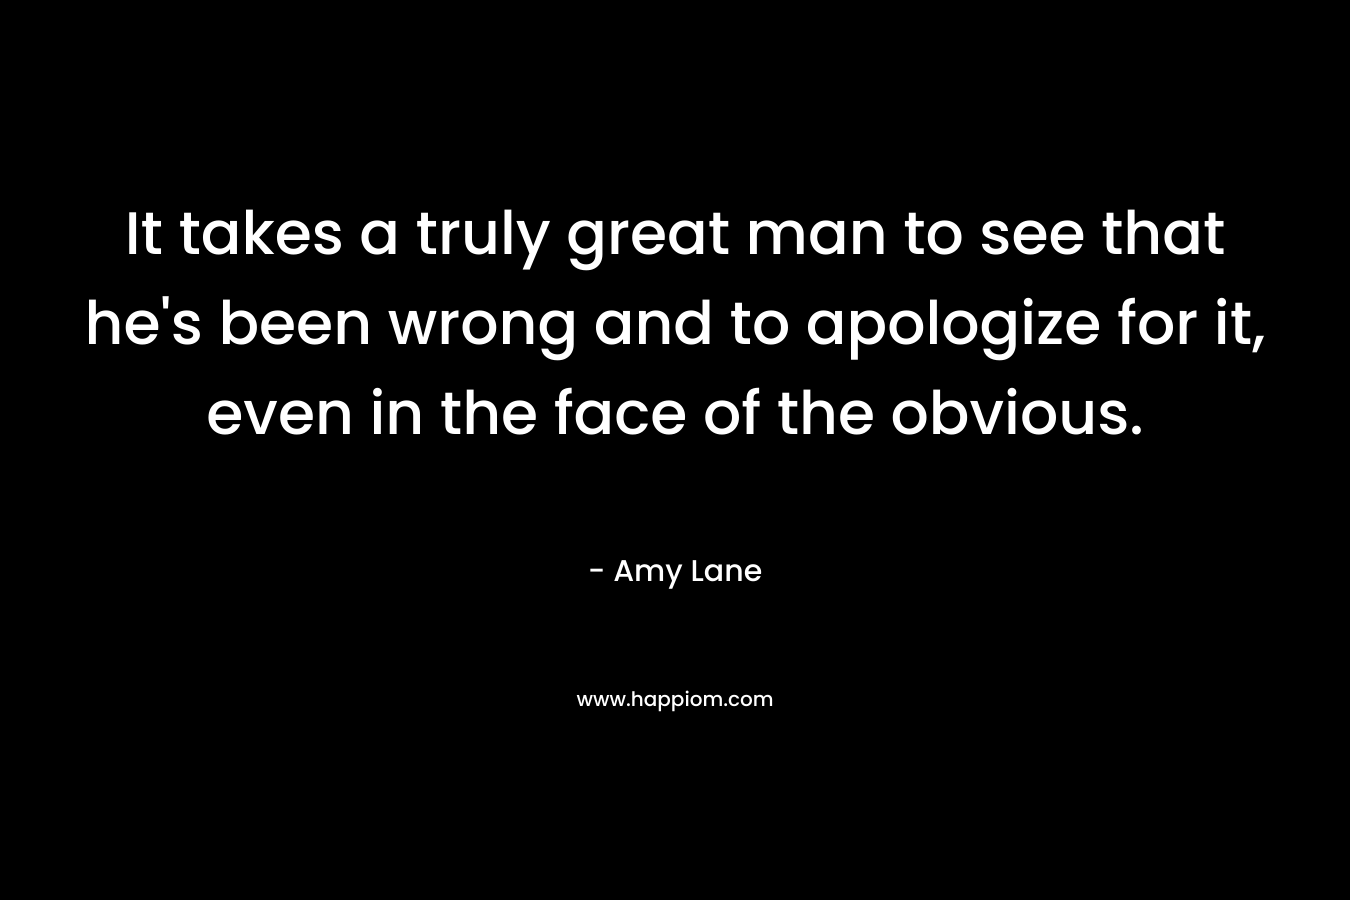 It takes a truly great man to see that he’s been wrong and to apologize for it, even in the face of the obvious. – Amy Lane